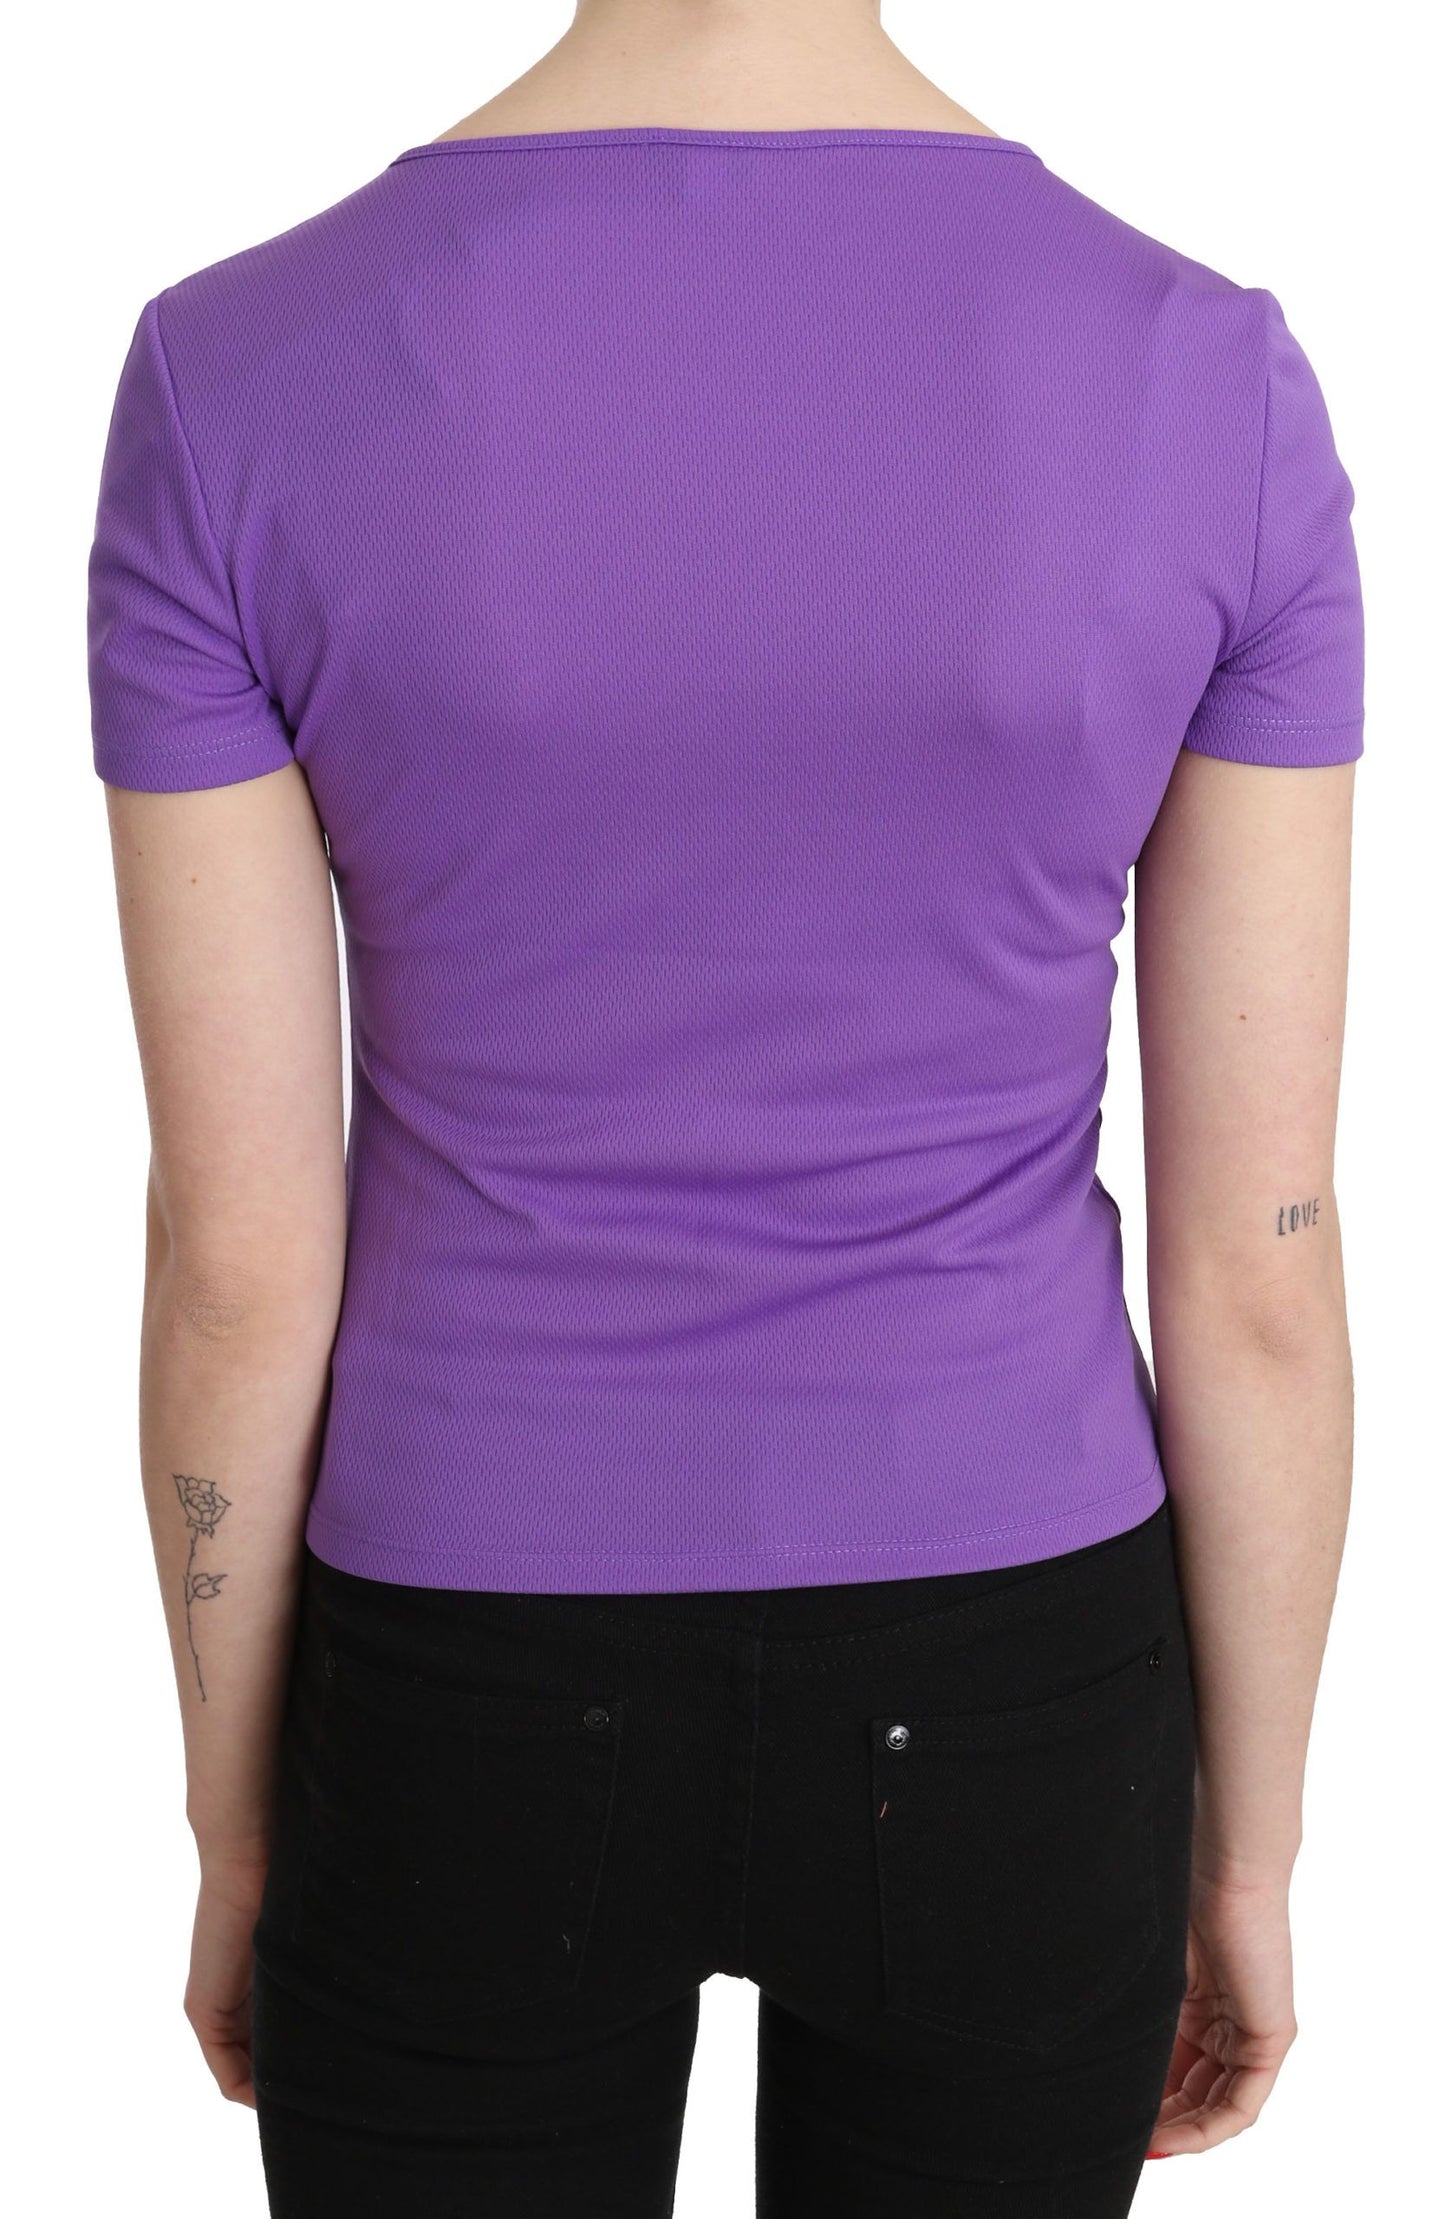 Chic Purple Casual Top for Everyday Elegance